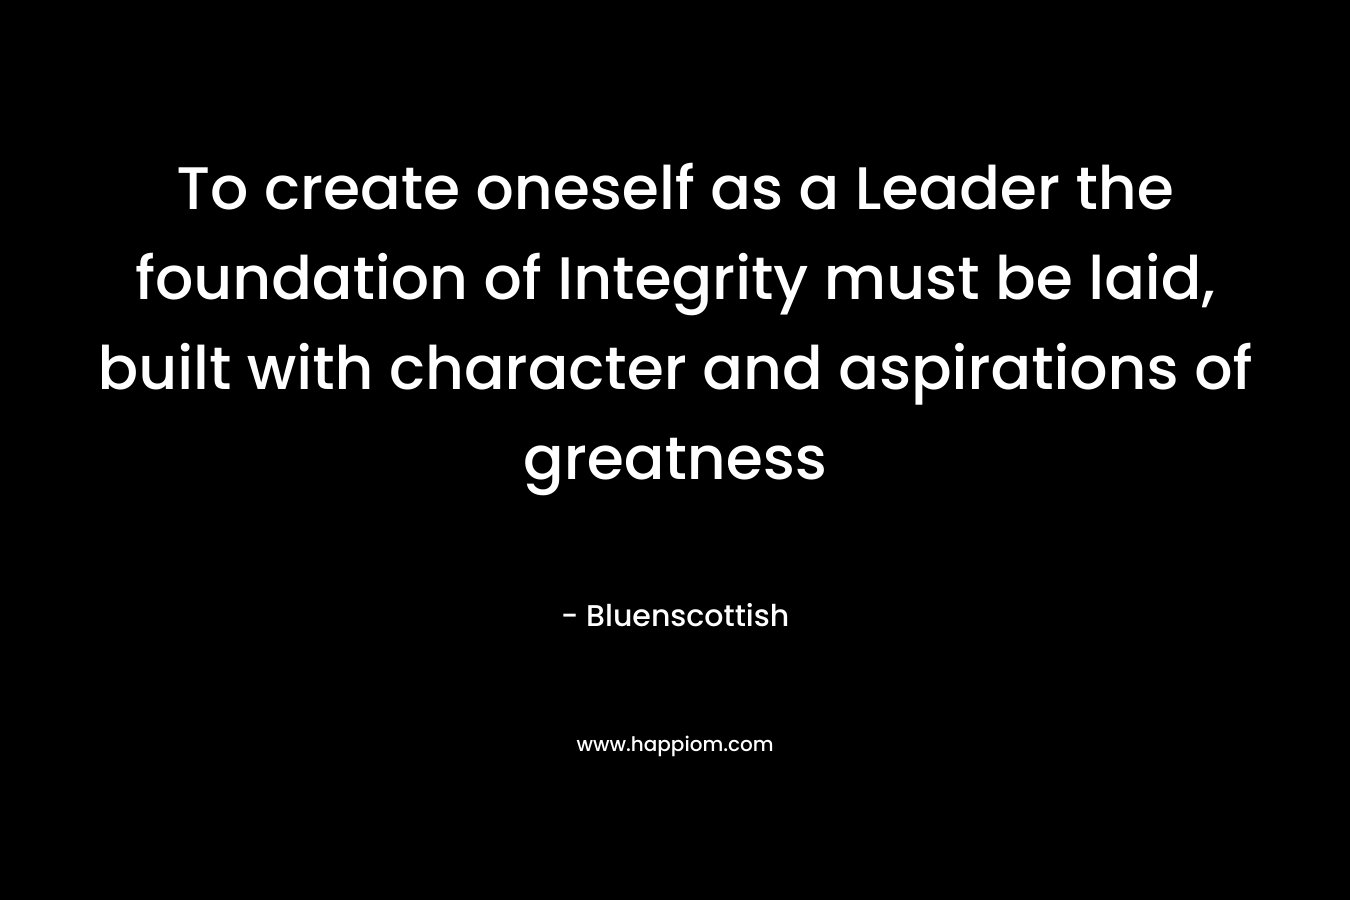 To create oneself as a Leader the foundation of Integrity must be laid, built with character and aspirations of greatness